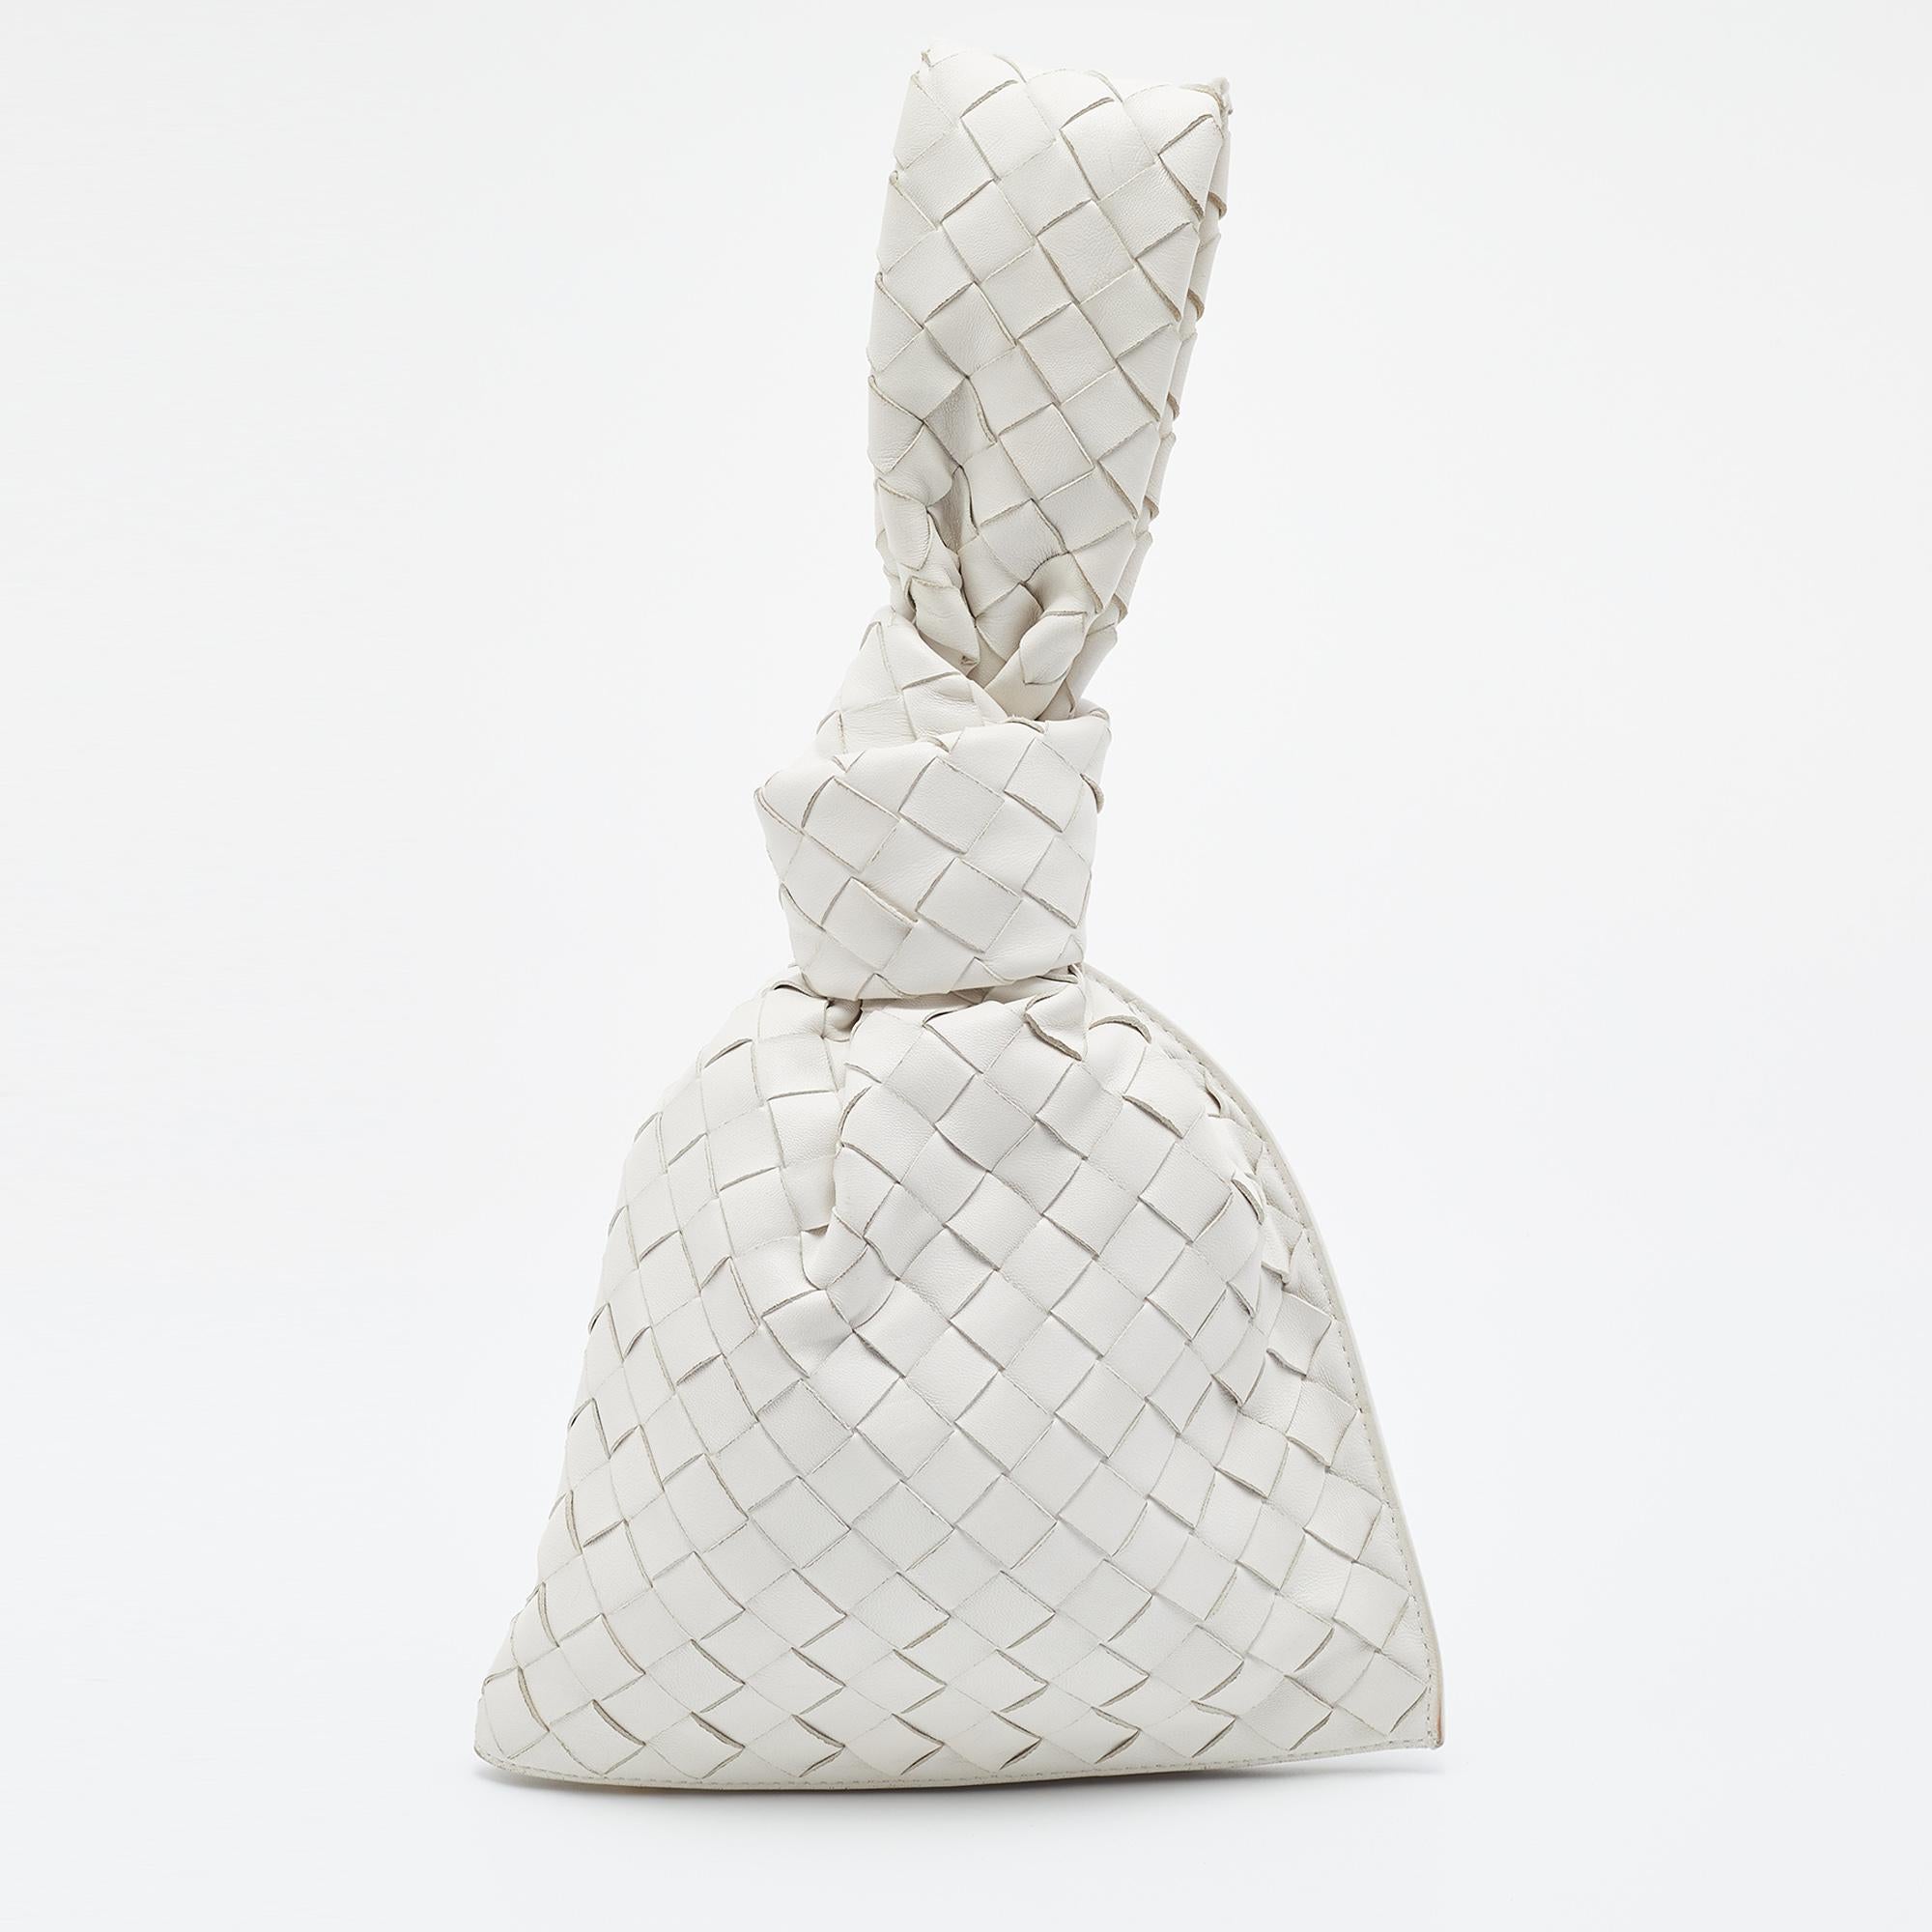 This leather mini bag from Bottega Veneta has the house's signature Intrecciato weaving technique which gives a seamless silhouette and lends a chic look. It has an interior that is well-sized to hold all your essentials. The white bag suspends from